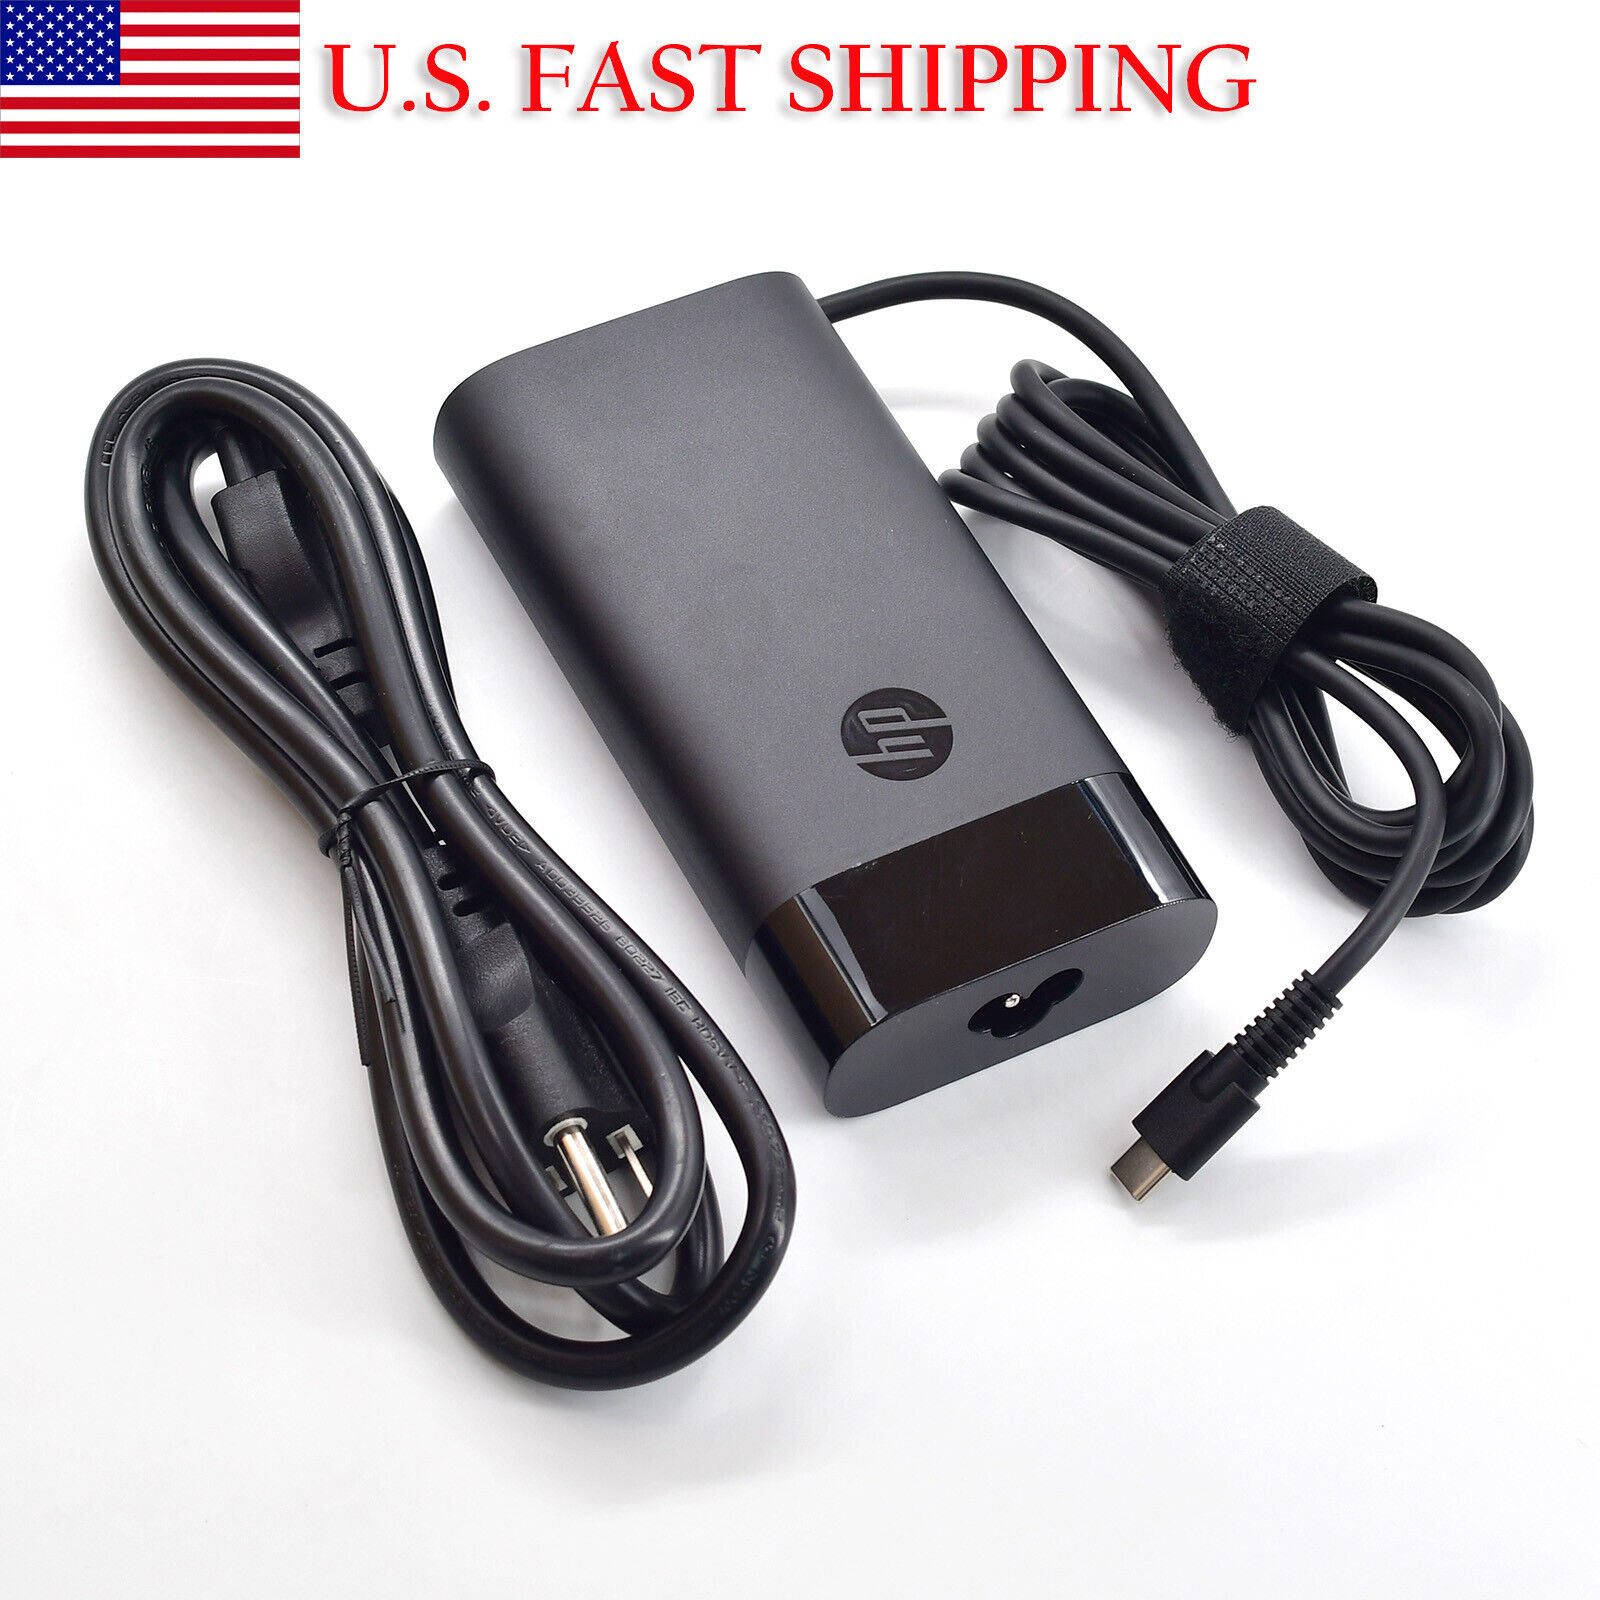 Original HP ENVY x360 2-in-1 Laptop 15t-ew000 15t-ew100 USB-C AC Adapter Charger